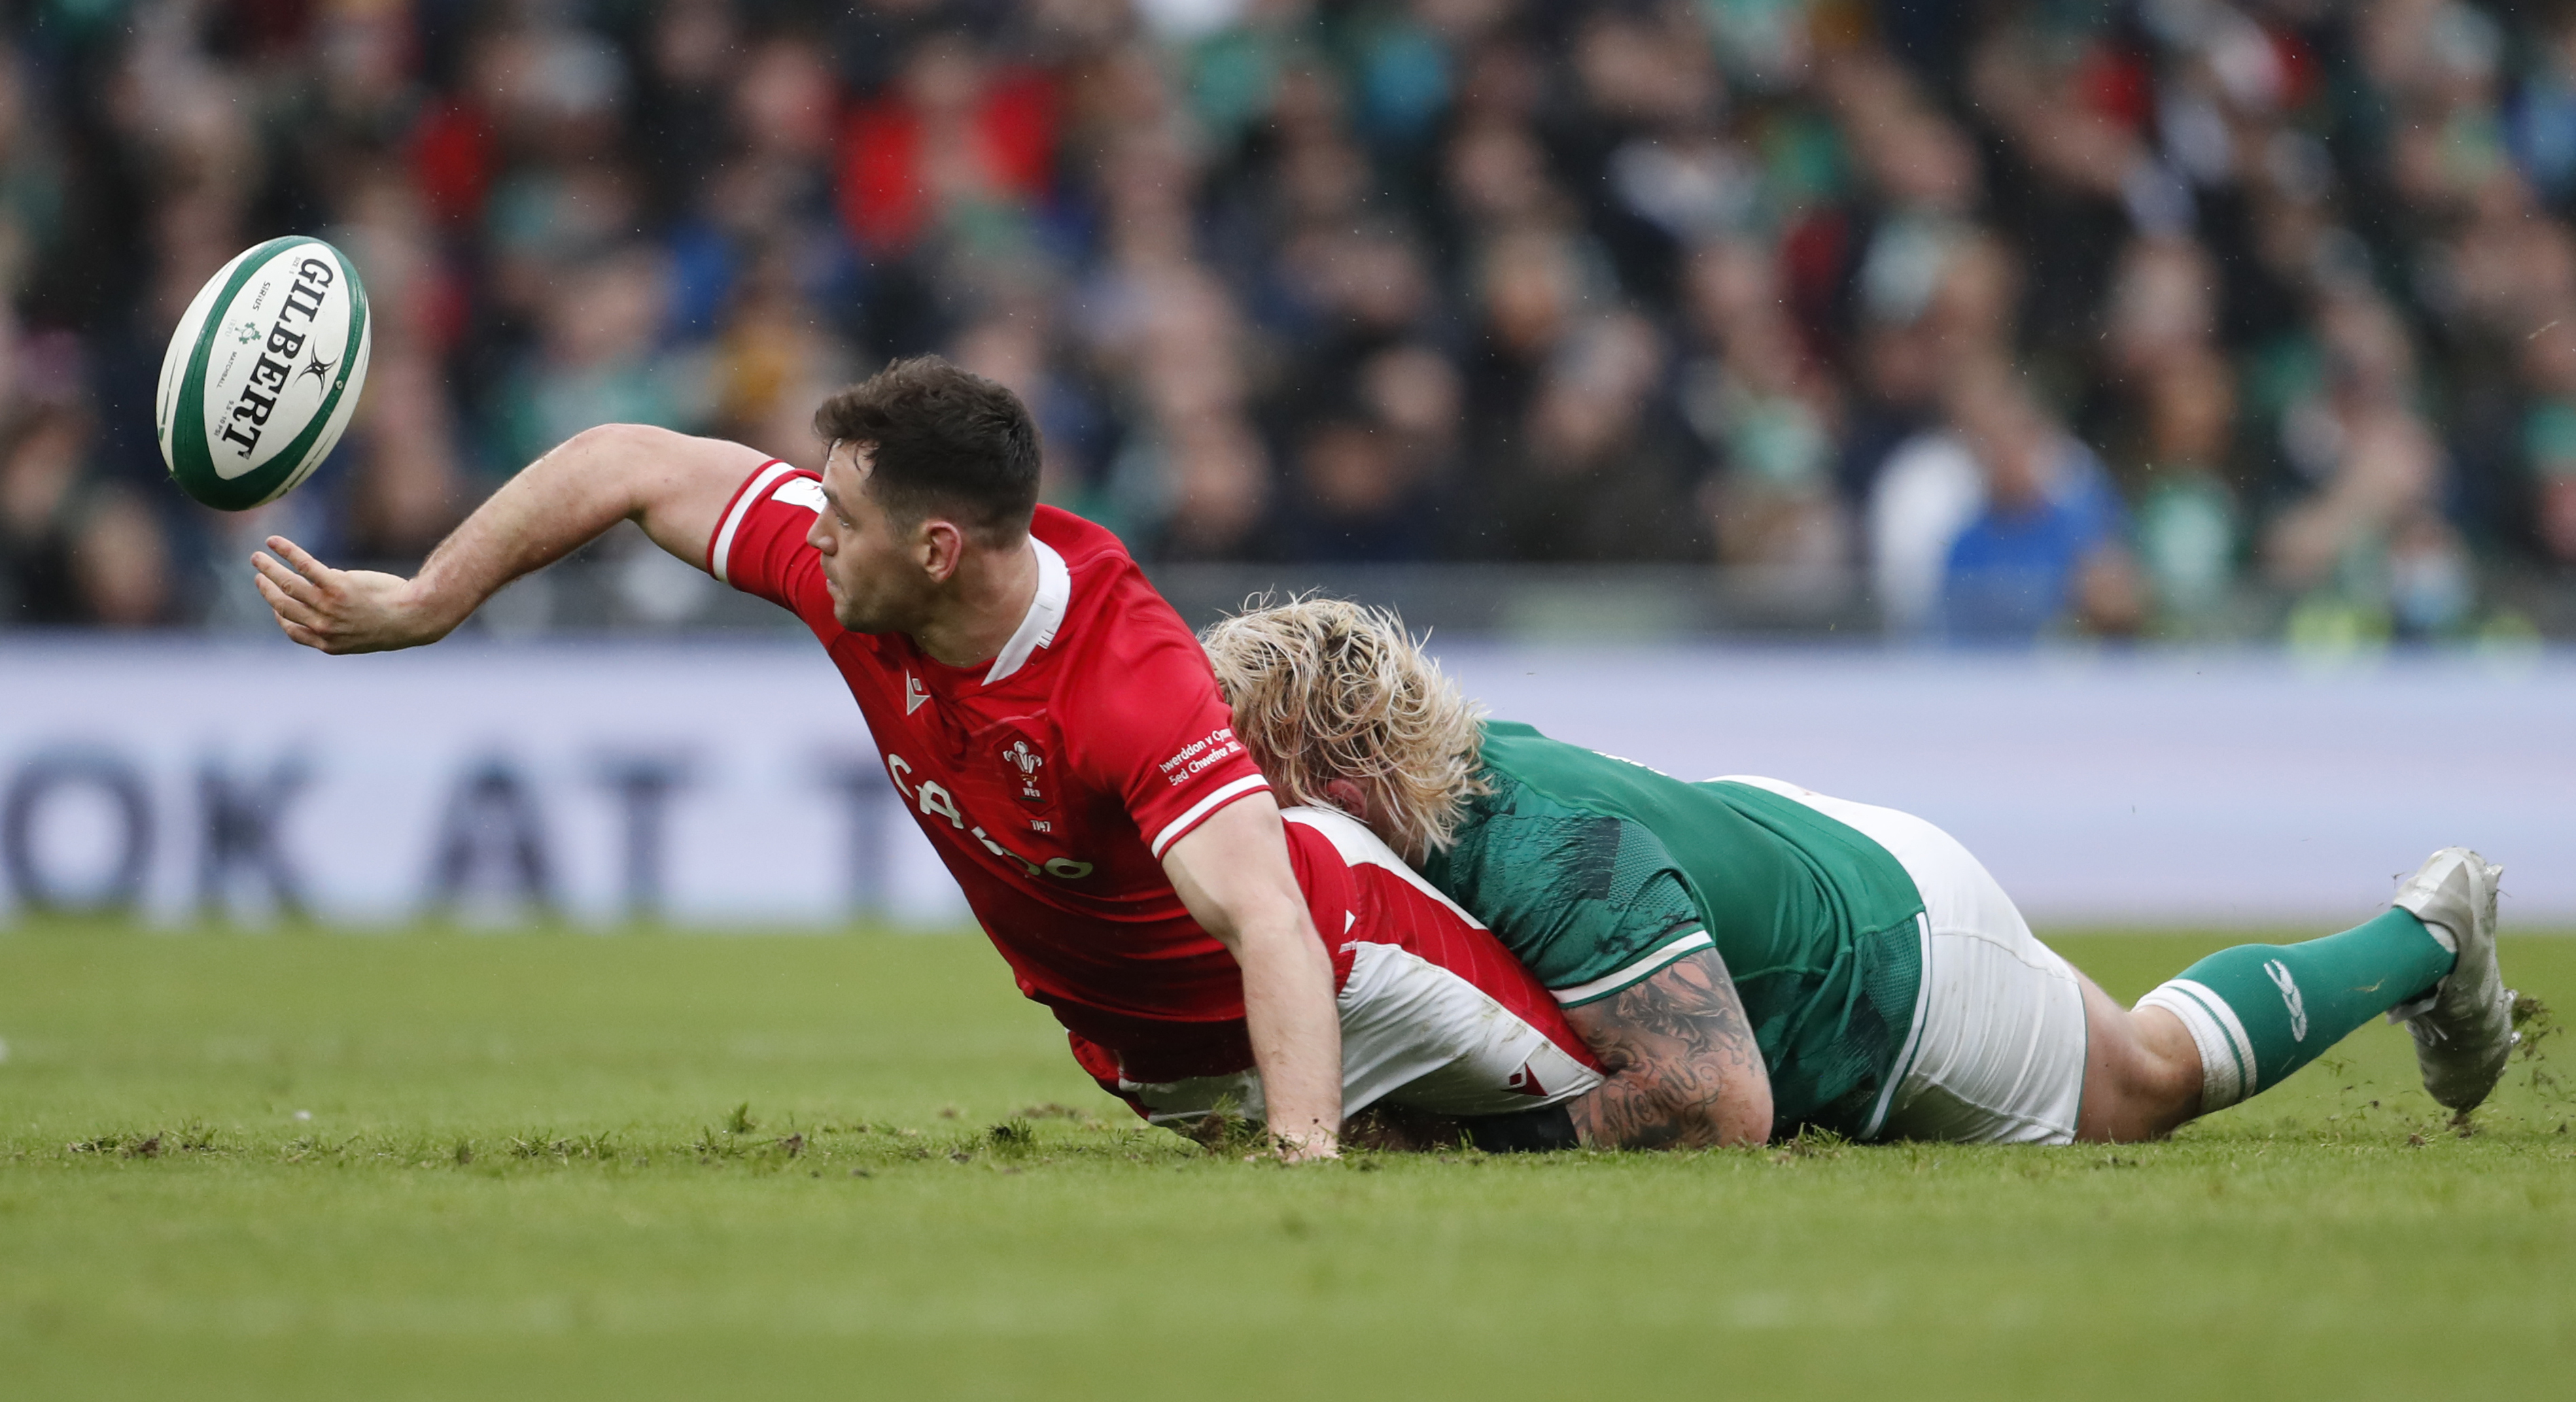 Wales' Tomos Williams, left, passes the ball as Ireland's Andrew Porter tackles during the Six Nations rugby union match between Ireland and Wales at the Aviva stadium in Dublin, Ireland, Saturday, Feb. 5, 2022. (AP Photo/Peter Morrison)